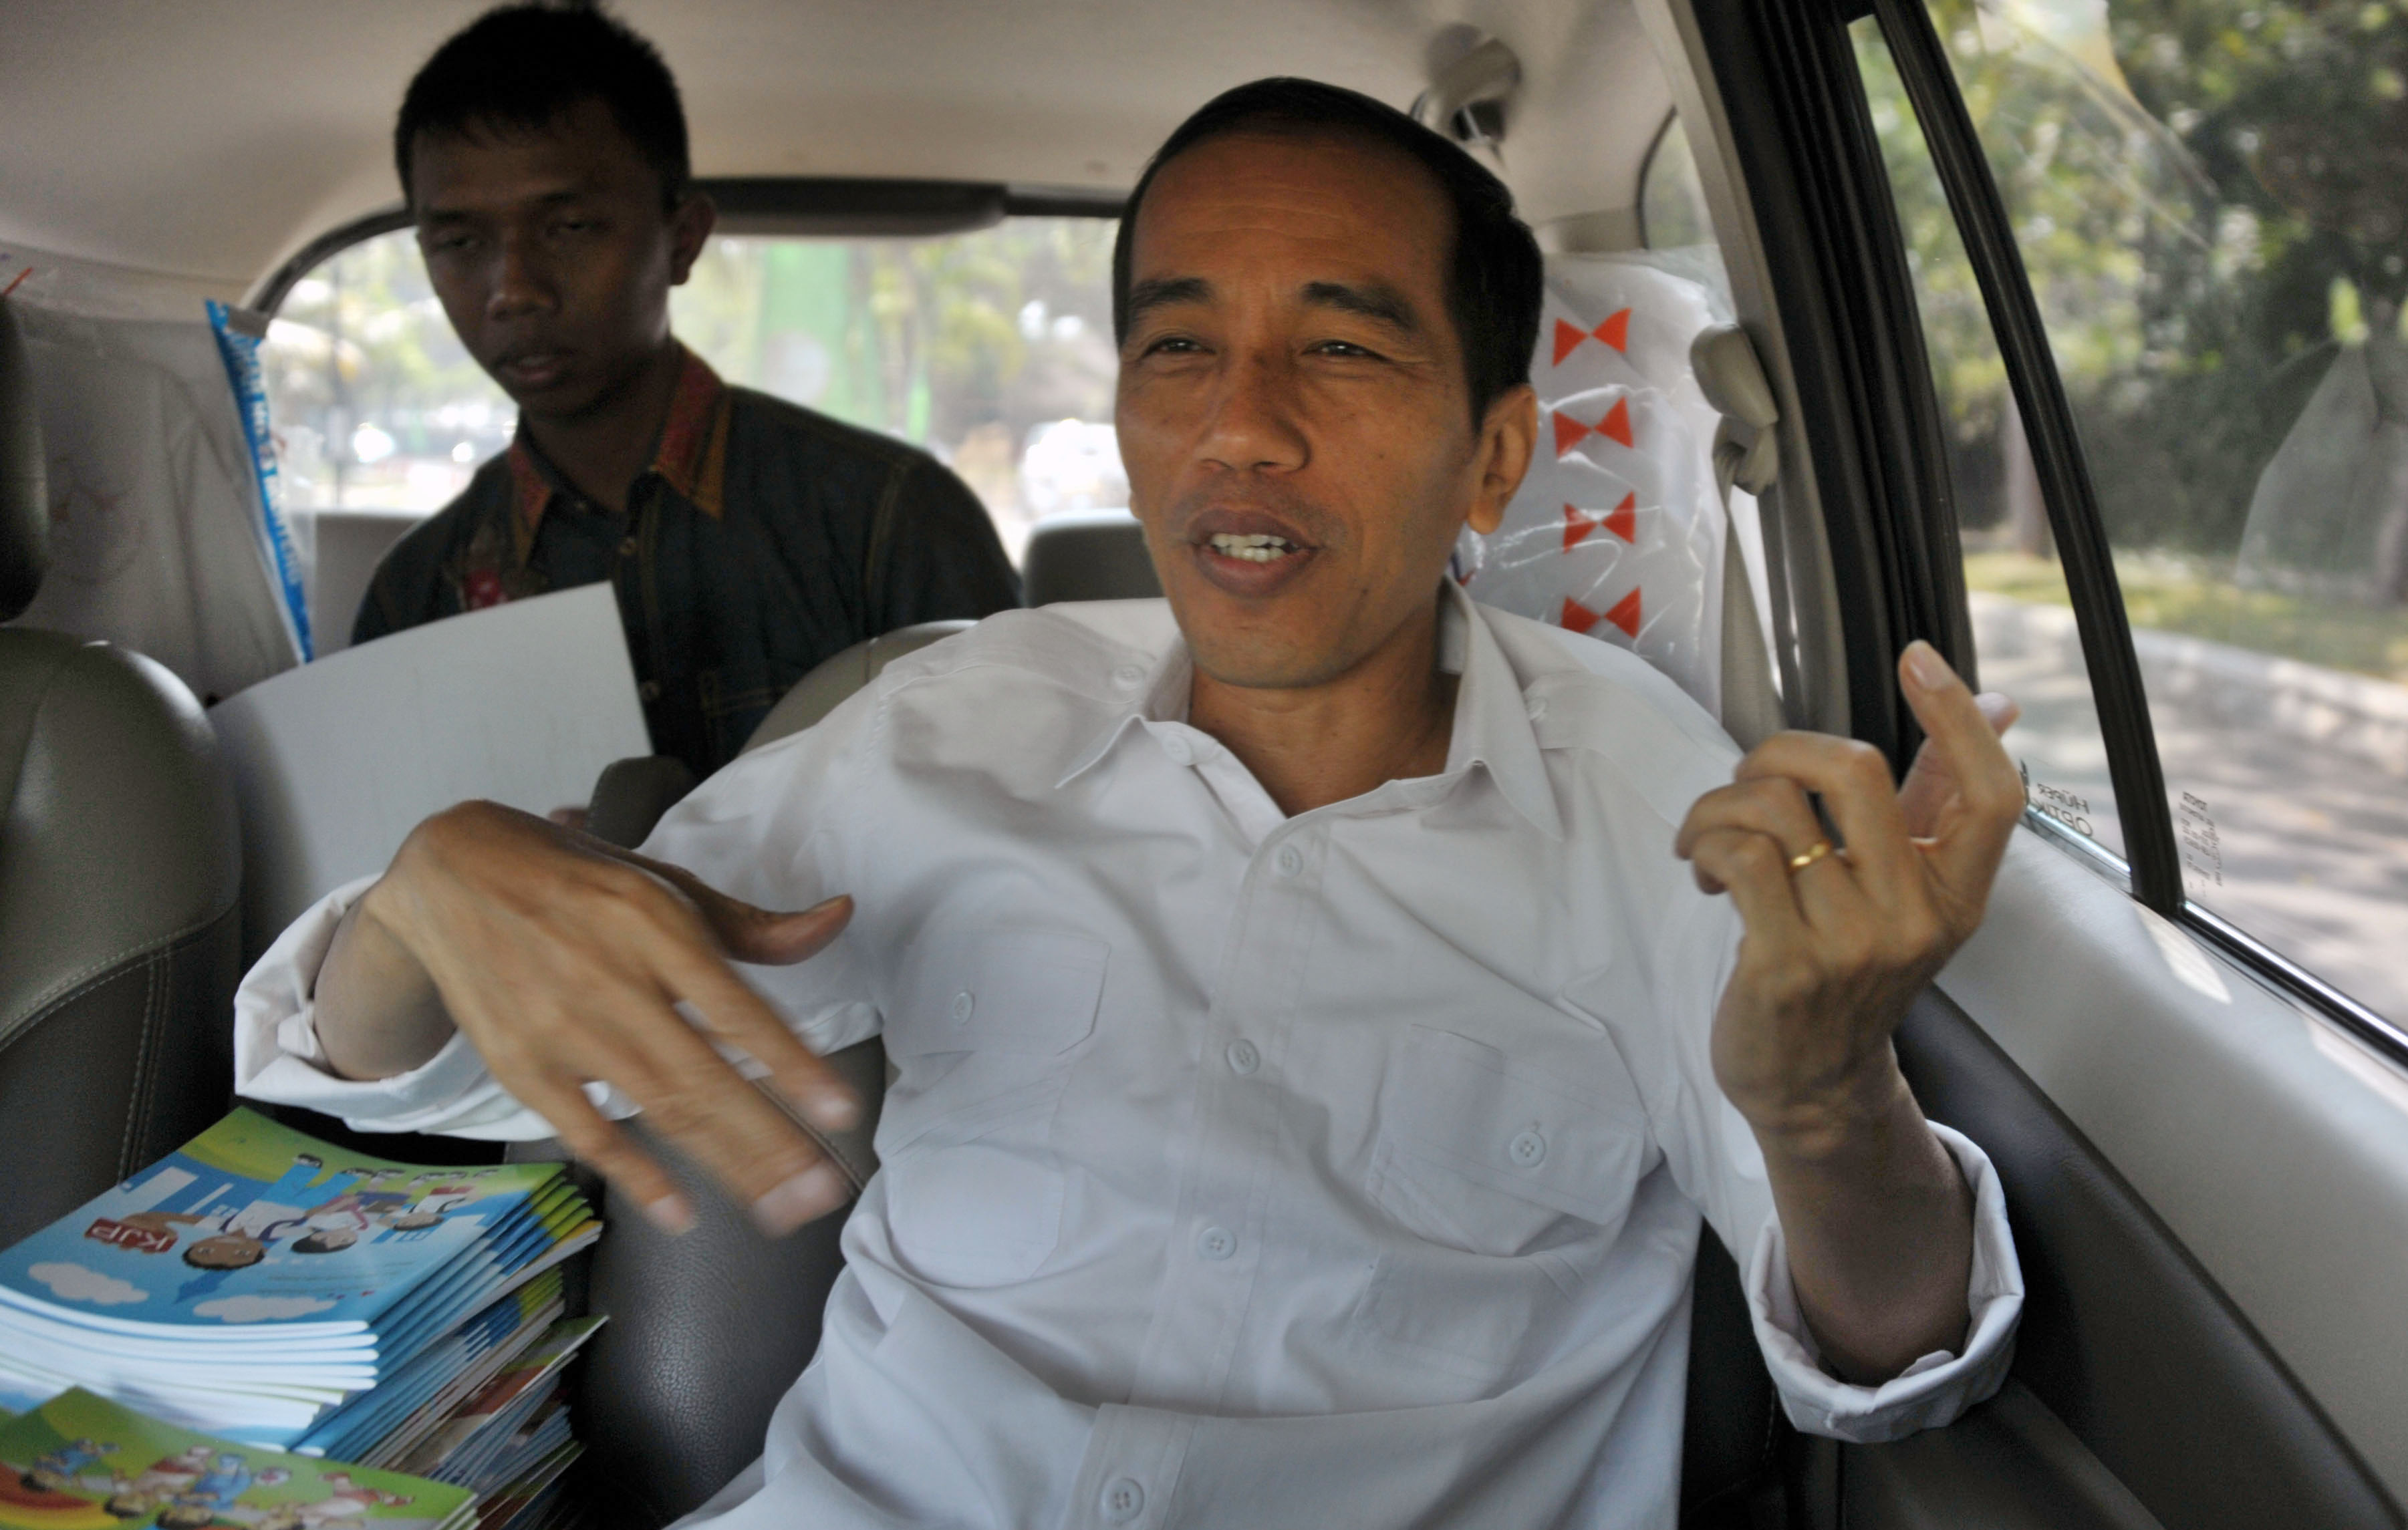 This picture taken on August 22, 2013, Jakarta governor Joko Widodo, a rock fan makes an air guitar gesture as he travels on a van on the way to make sight inspection in Jakarta city. (BAY ISMOYO—AFP/Getty Images)